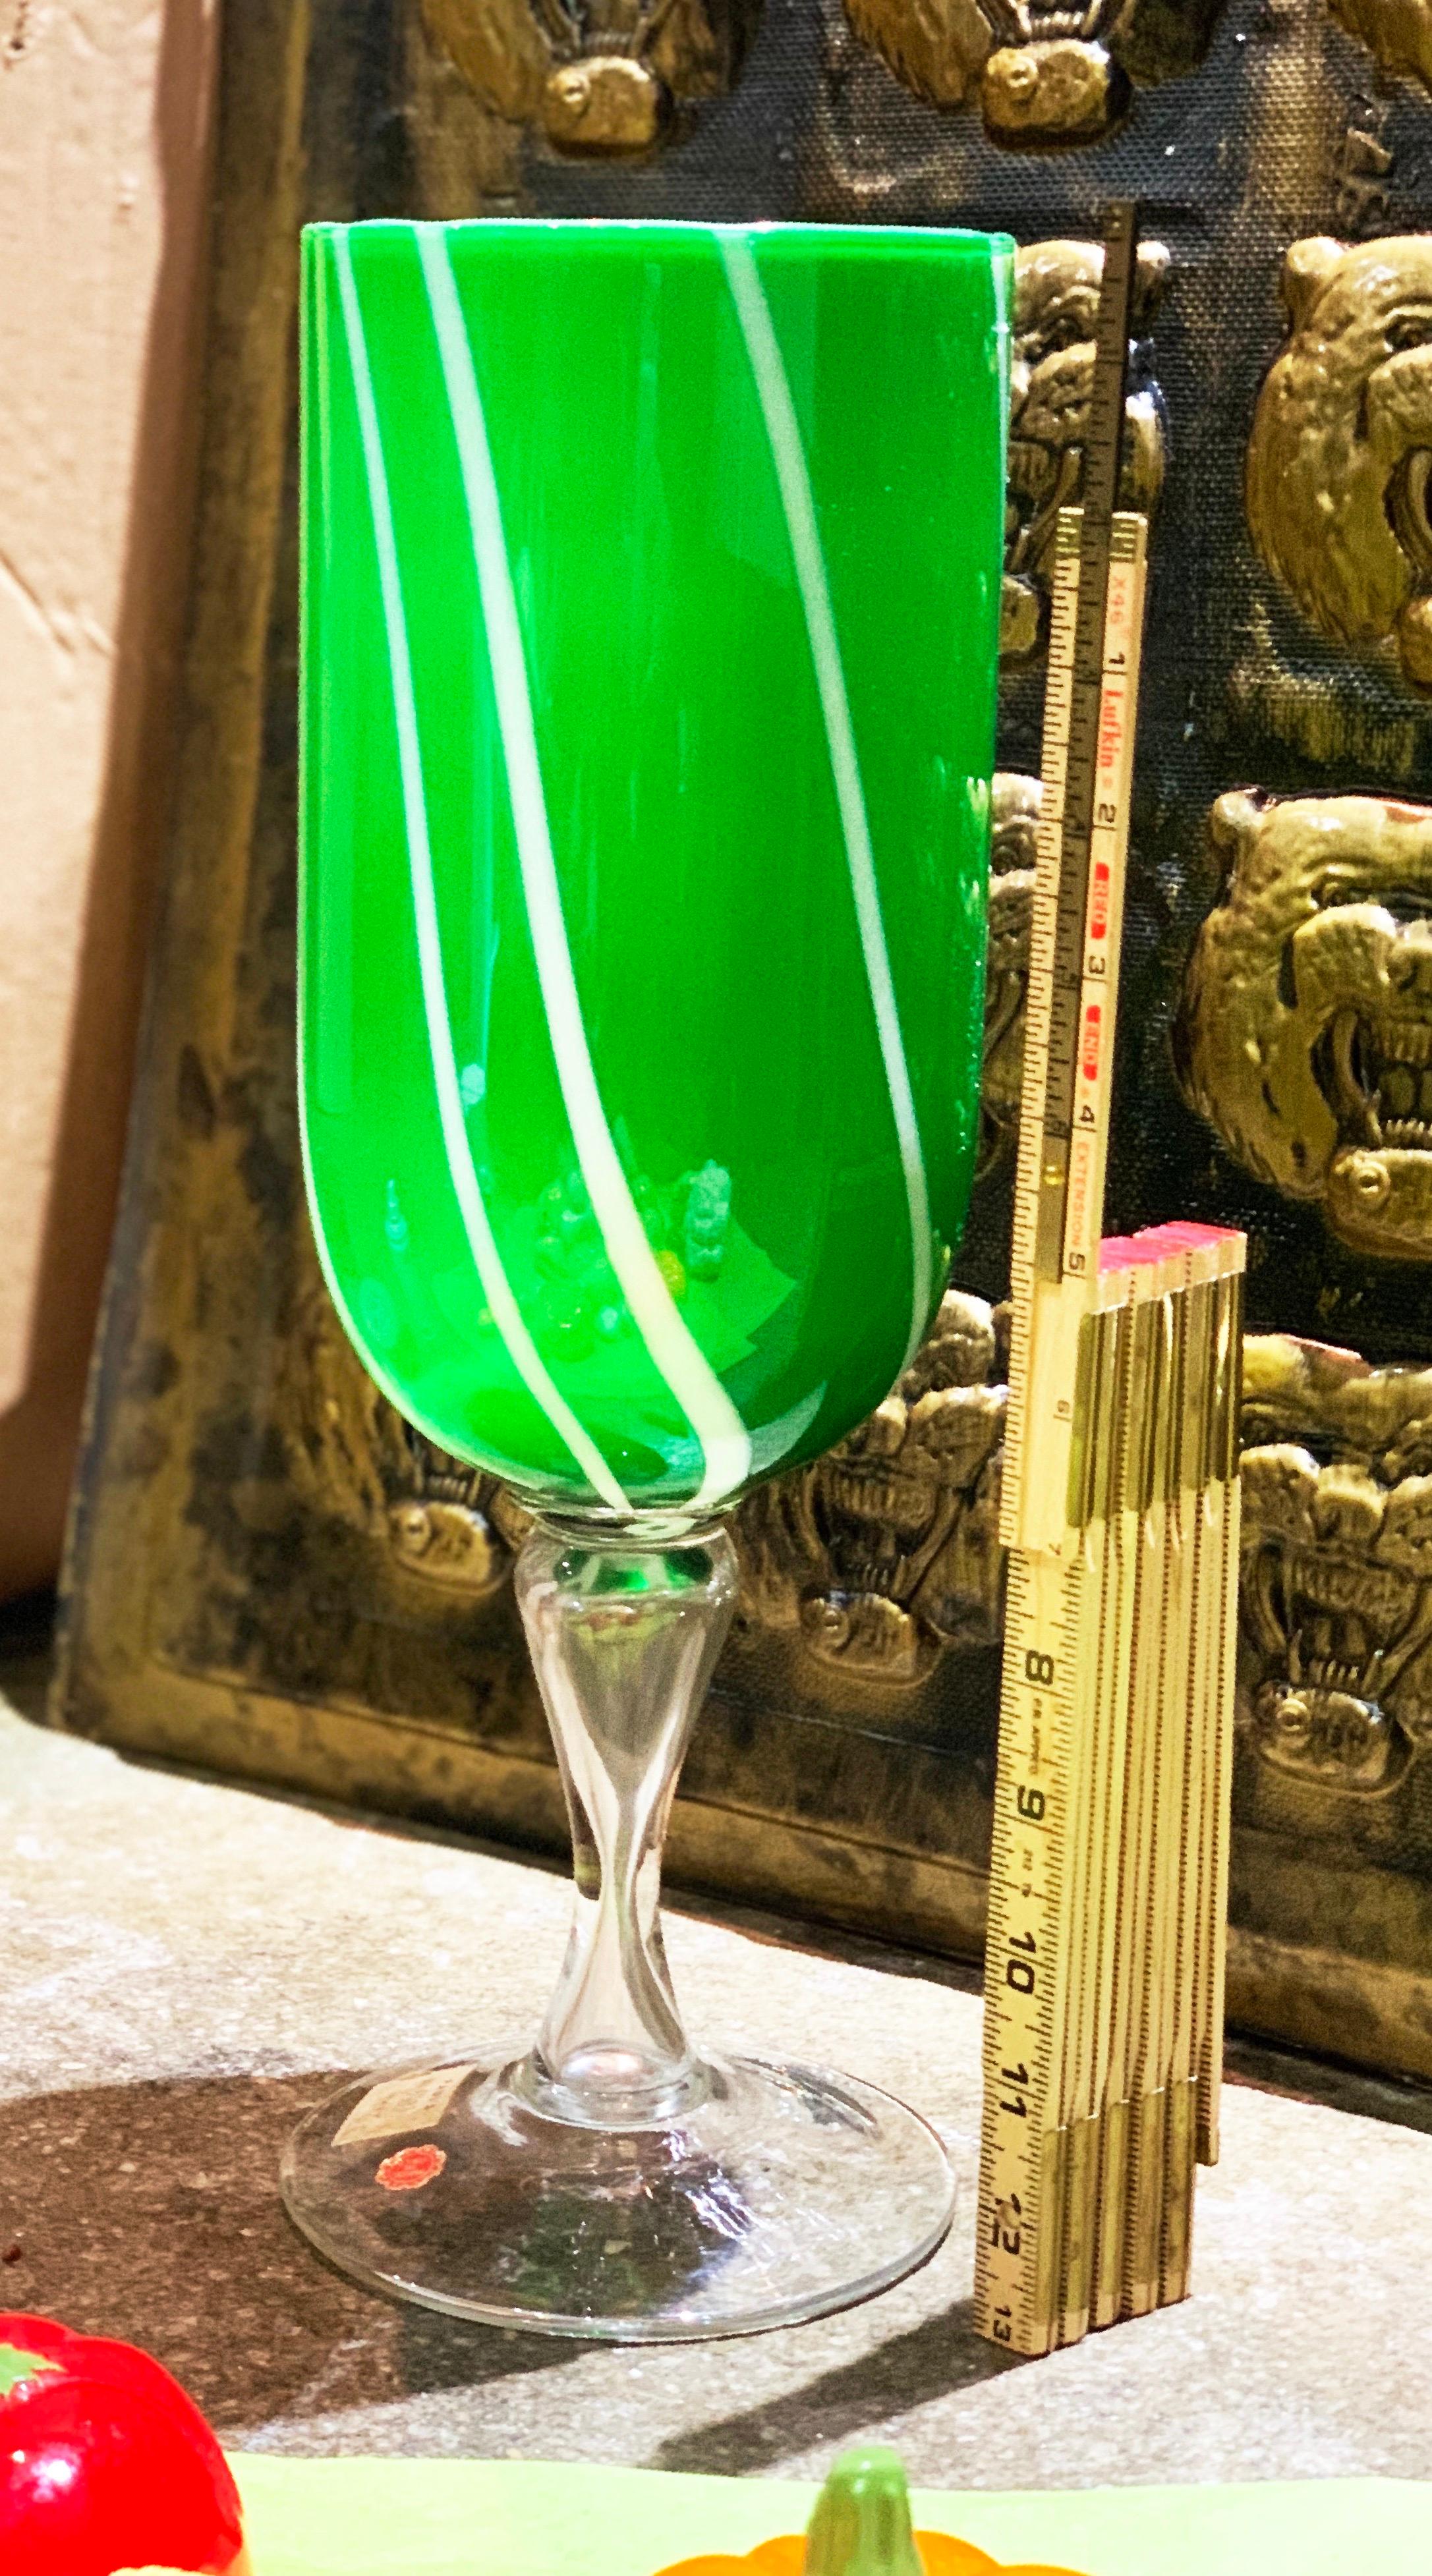 Midcentury Murano blown glass chalice vase pedestal, Kelly Green, 1960s, Venice. With import sticker.